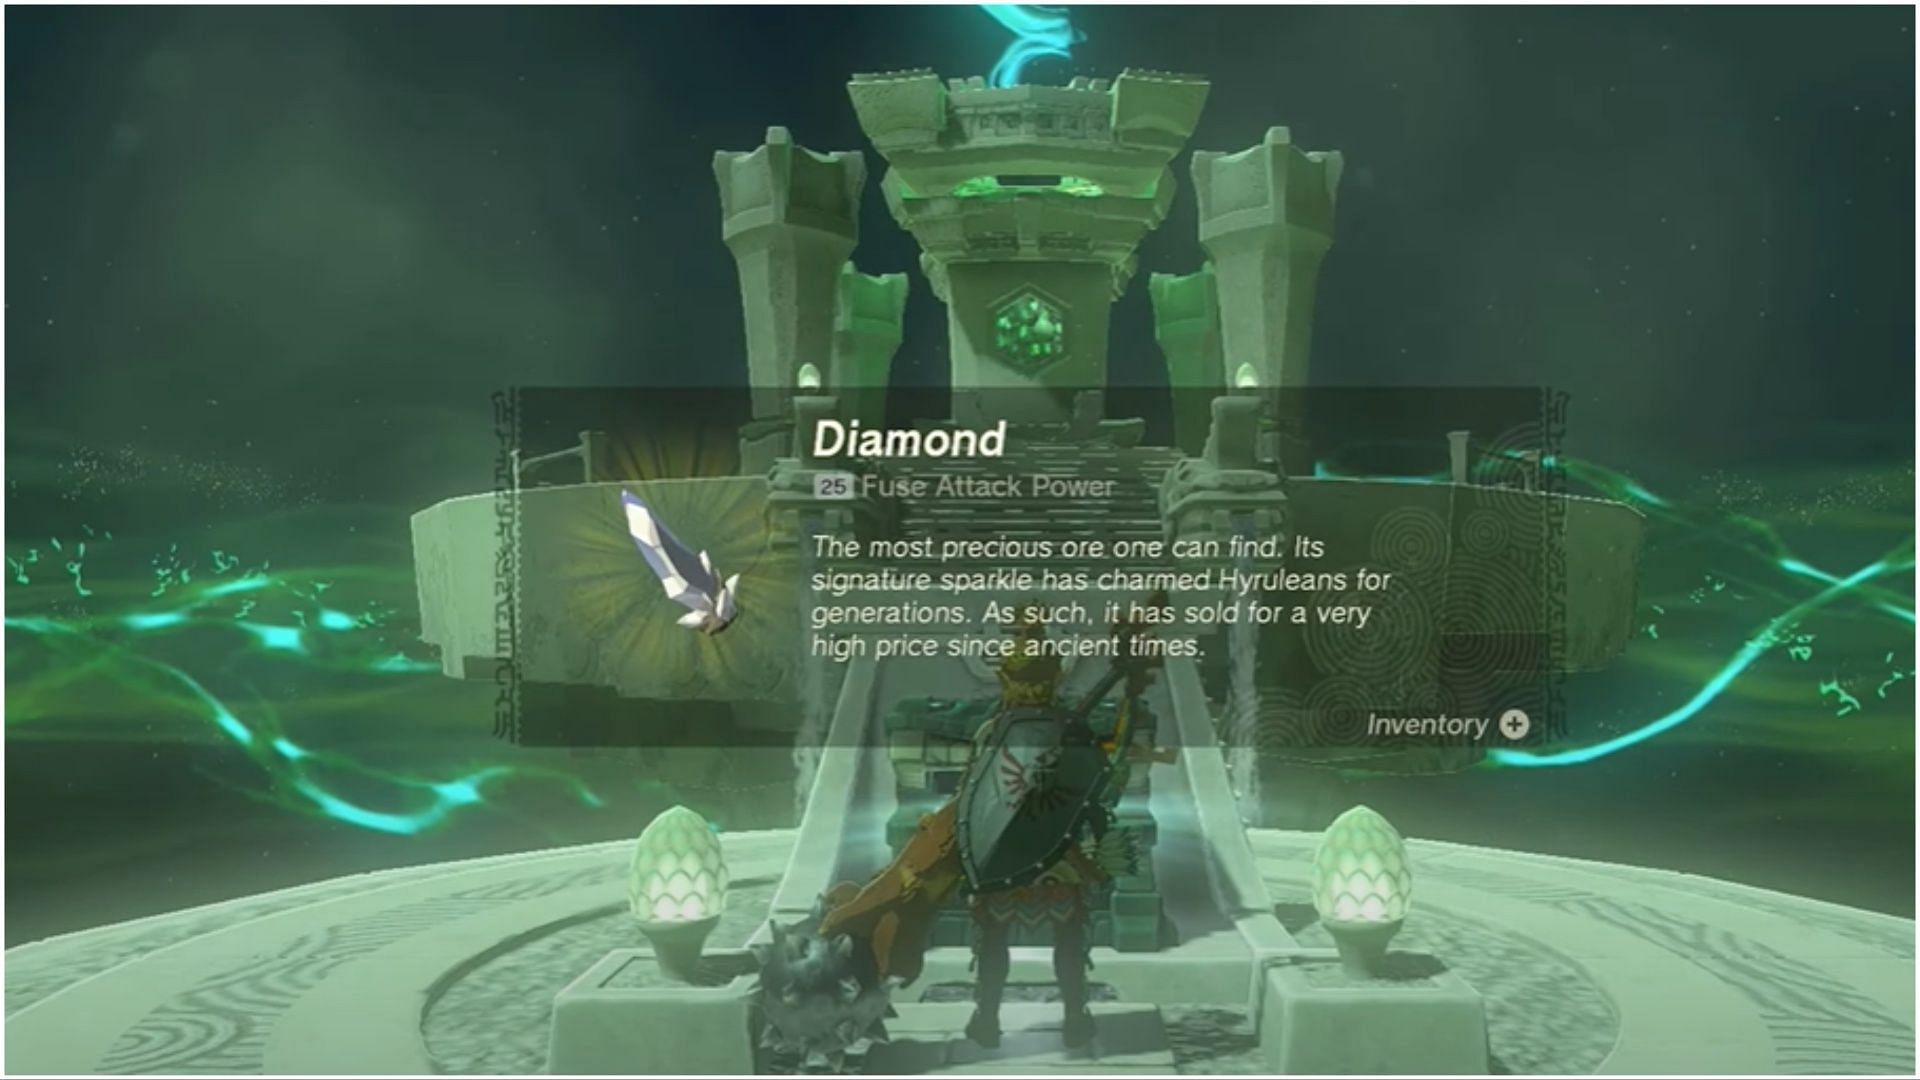 Diamonds are an essential component of the inventory because they are highly valuable (Image via The Legend of Zelda Tears of the Kingdom)